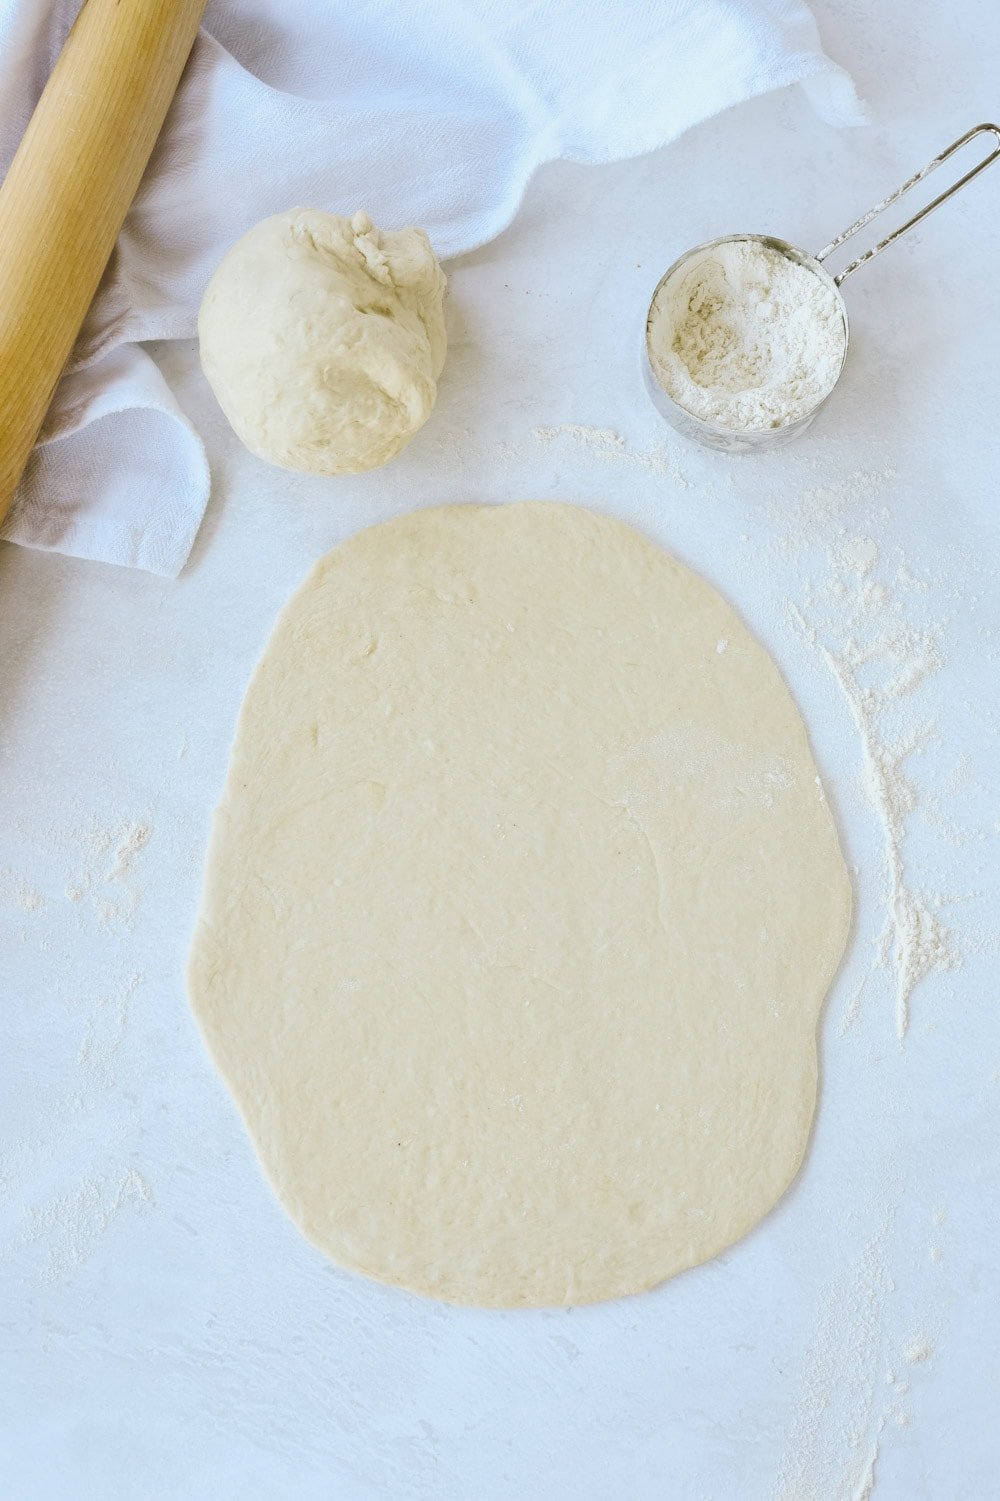 rolled out dough for flatbread